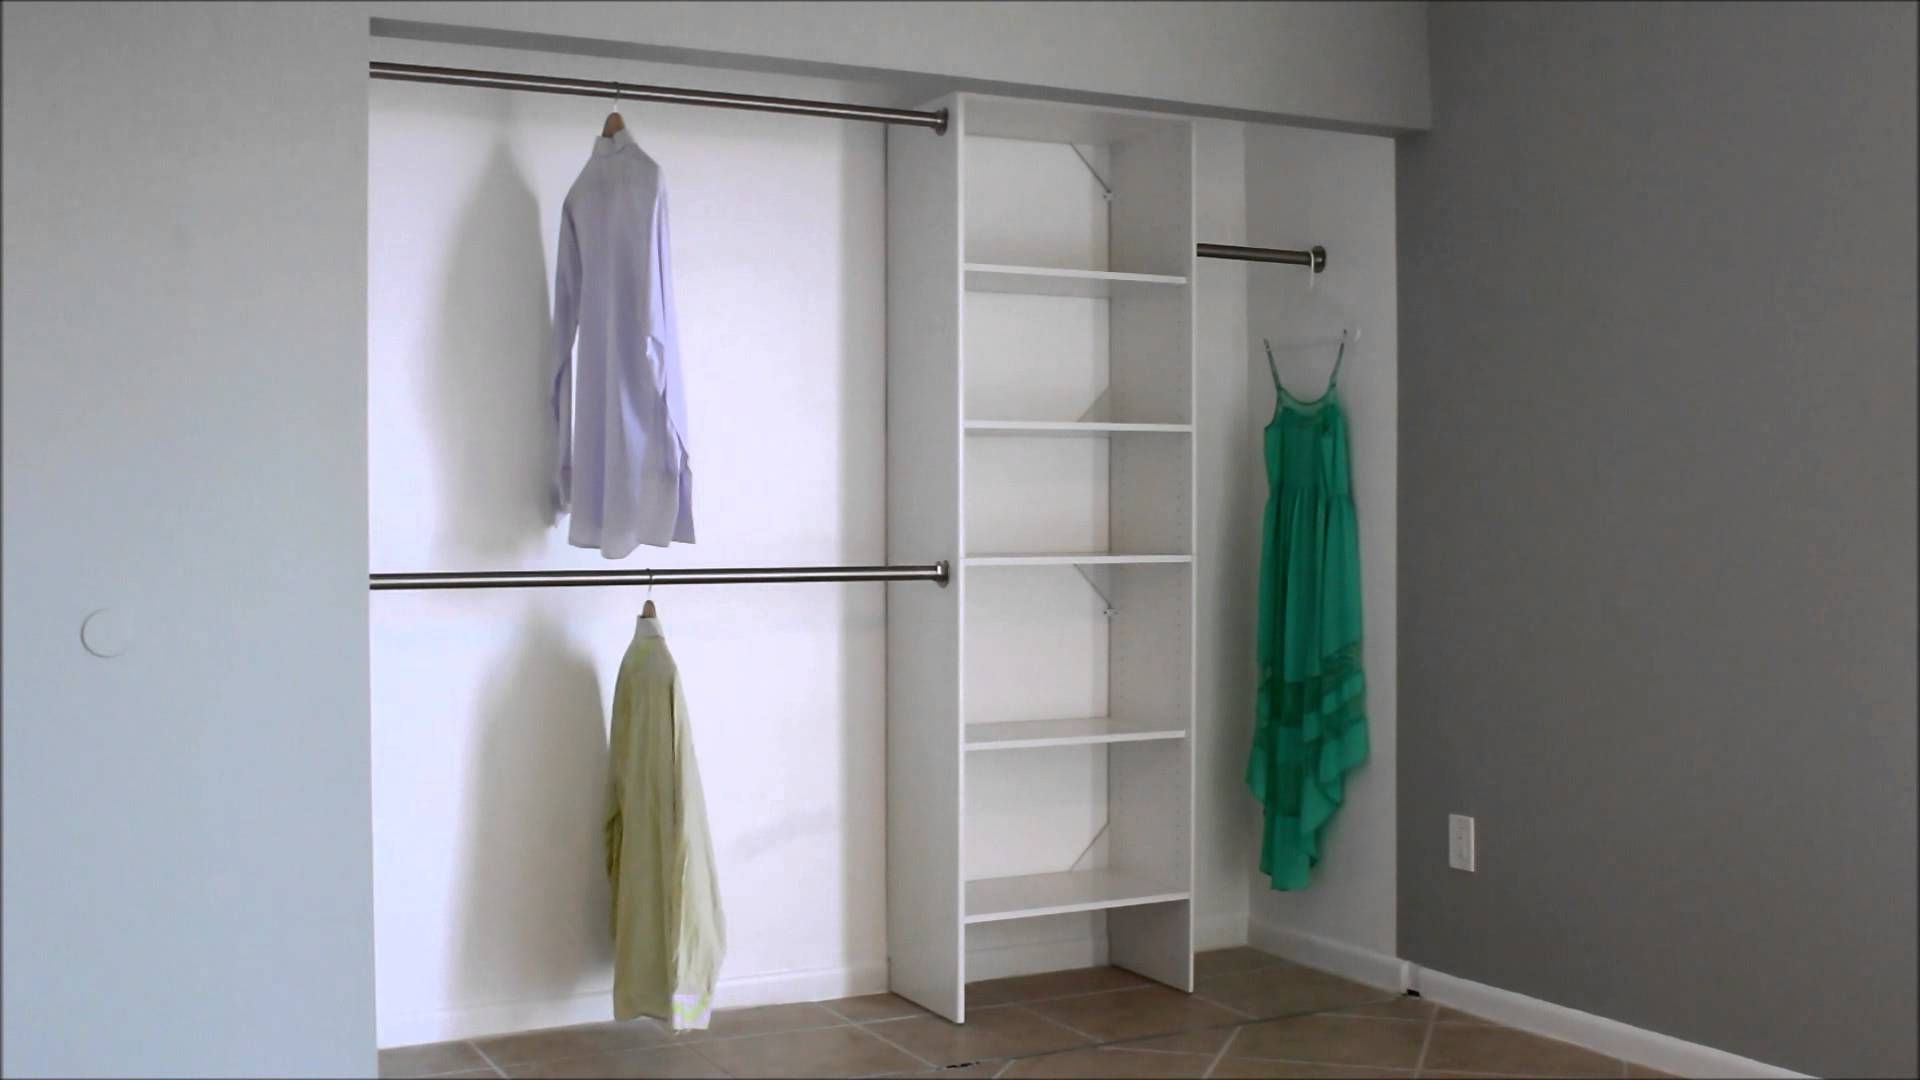 Double Rod Closet Height | Standard Closet Rod Height | Closet Rod Height,  Closet Rod, Closet Bedroom With Tall Double Rail Wardrobes (Gallery 8 of 20)